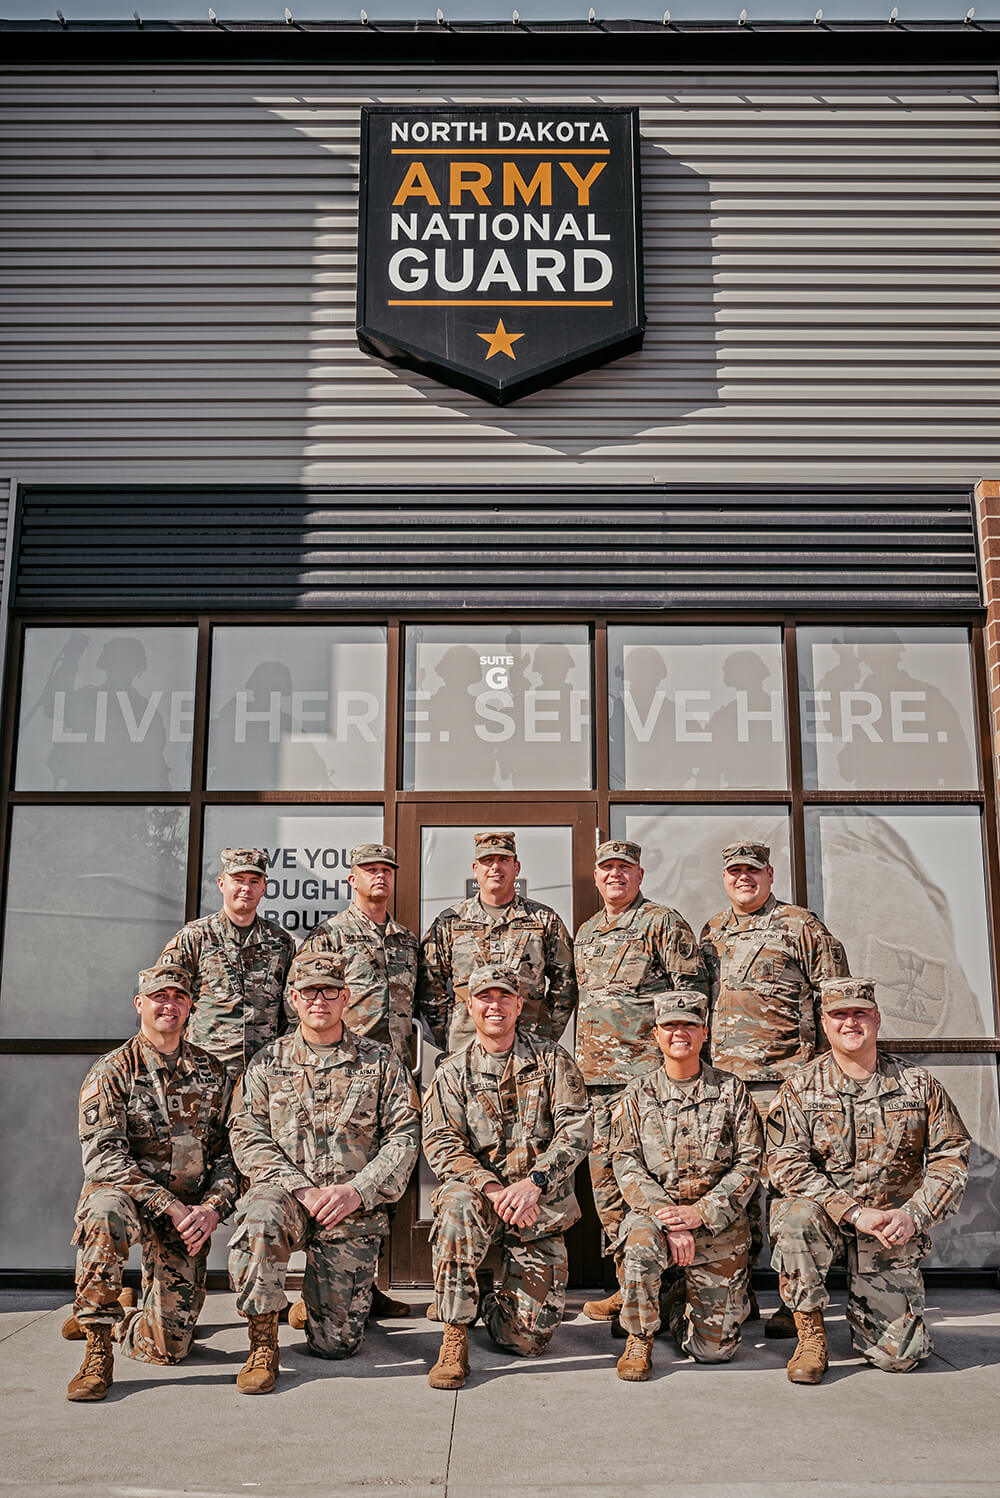 Army National Guard FACES